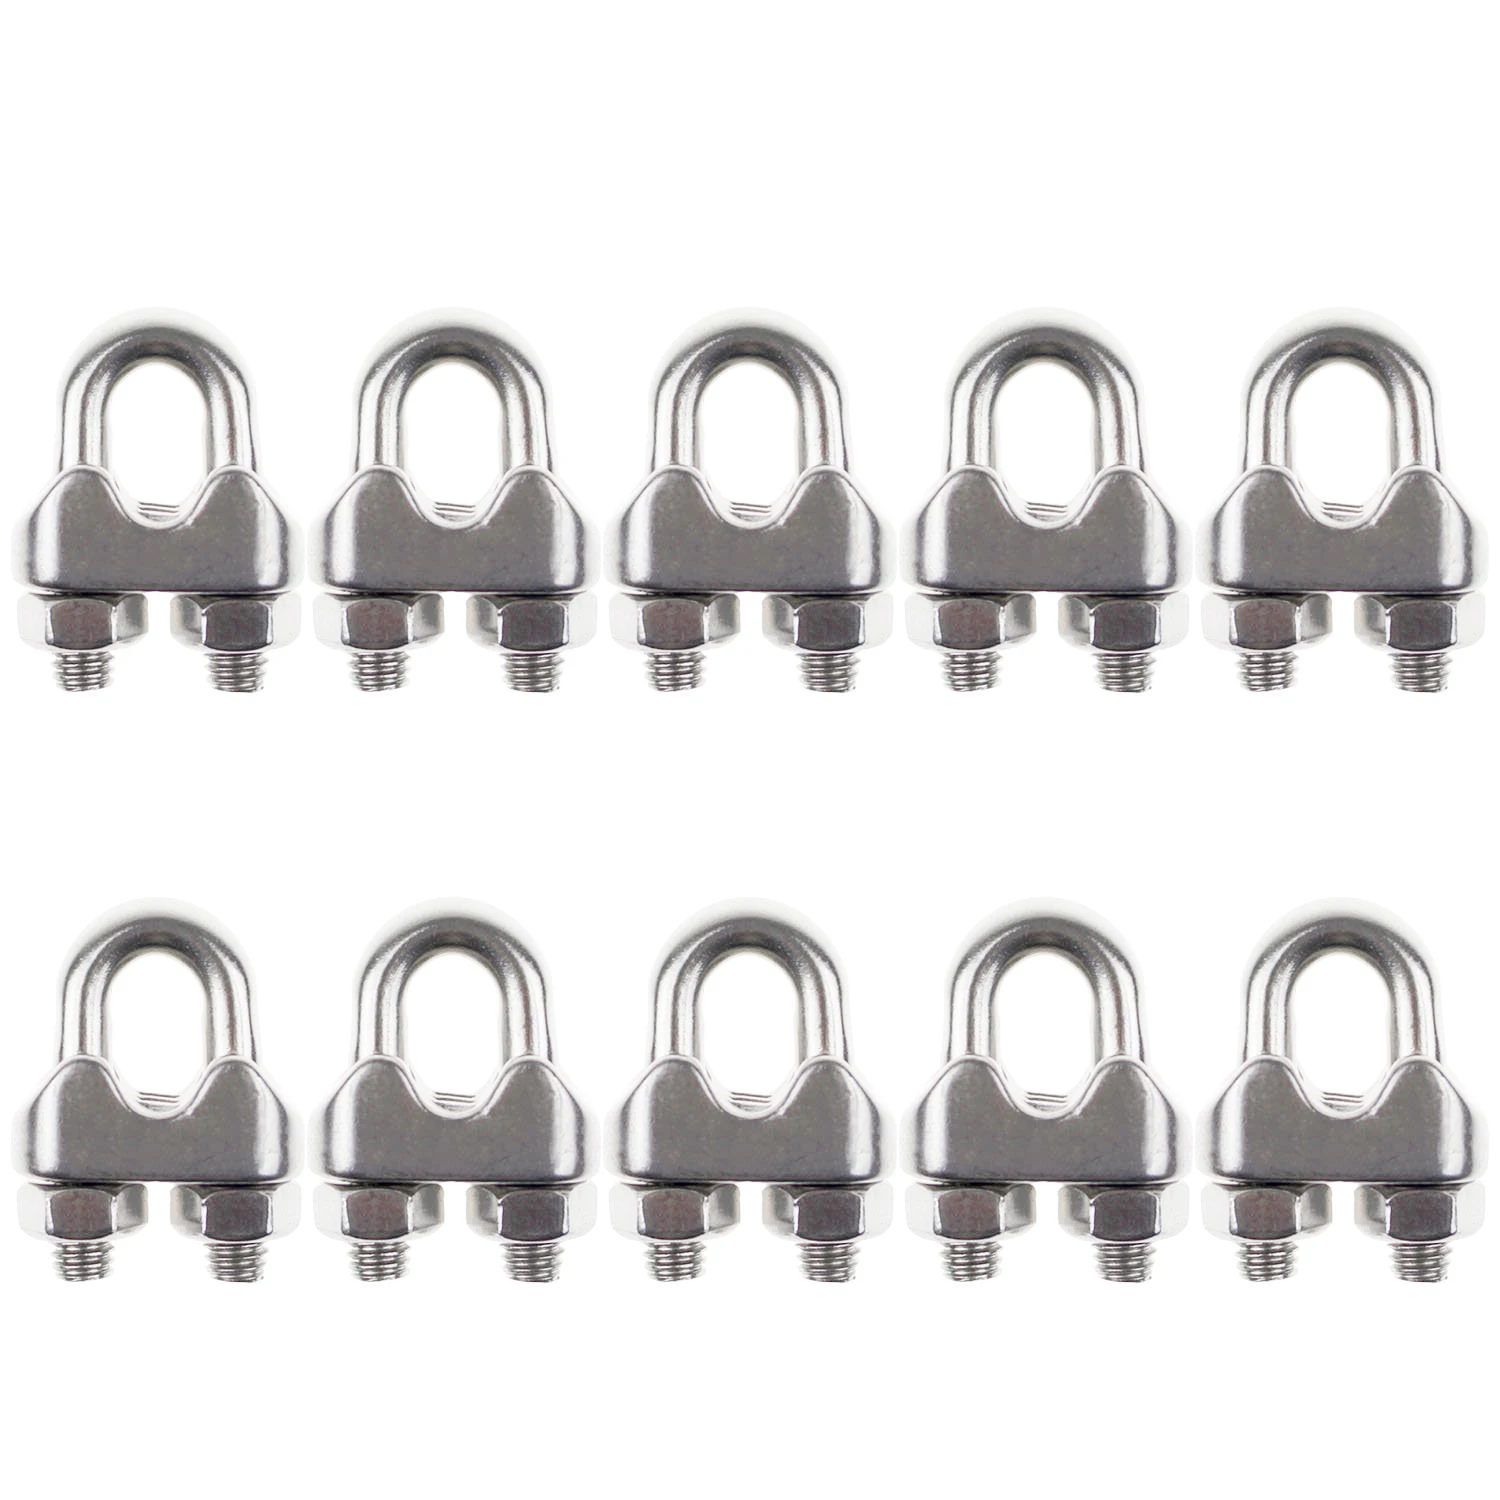 10Pcs Stainless Steel 2mm 1/16 Inch Wire Rope Clip Cable Clamp Fastener Silver Tone |